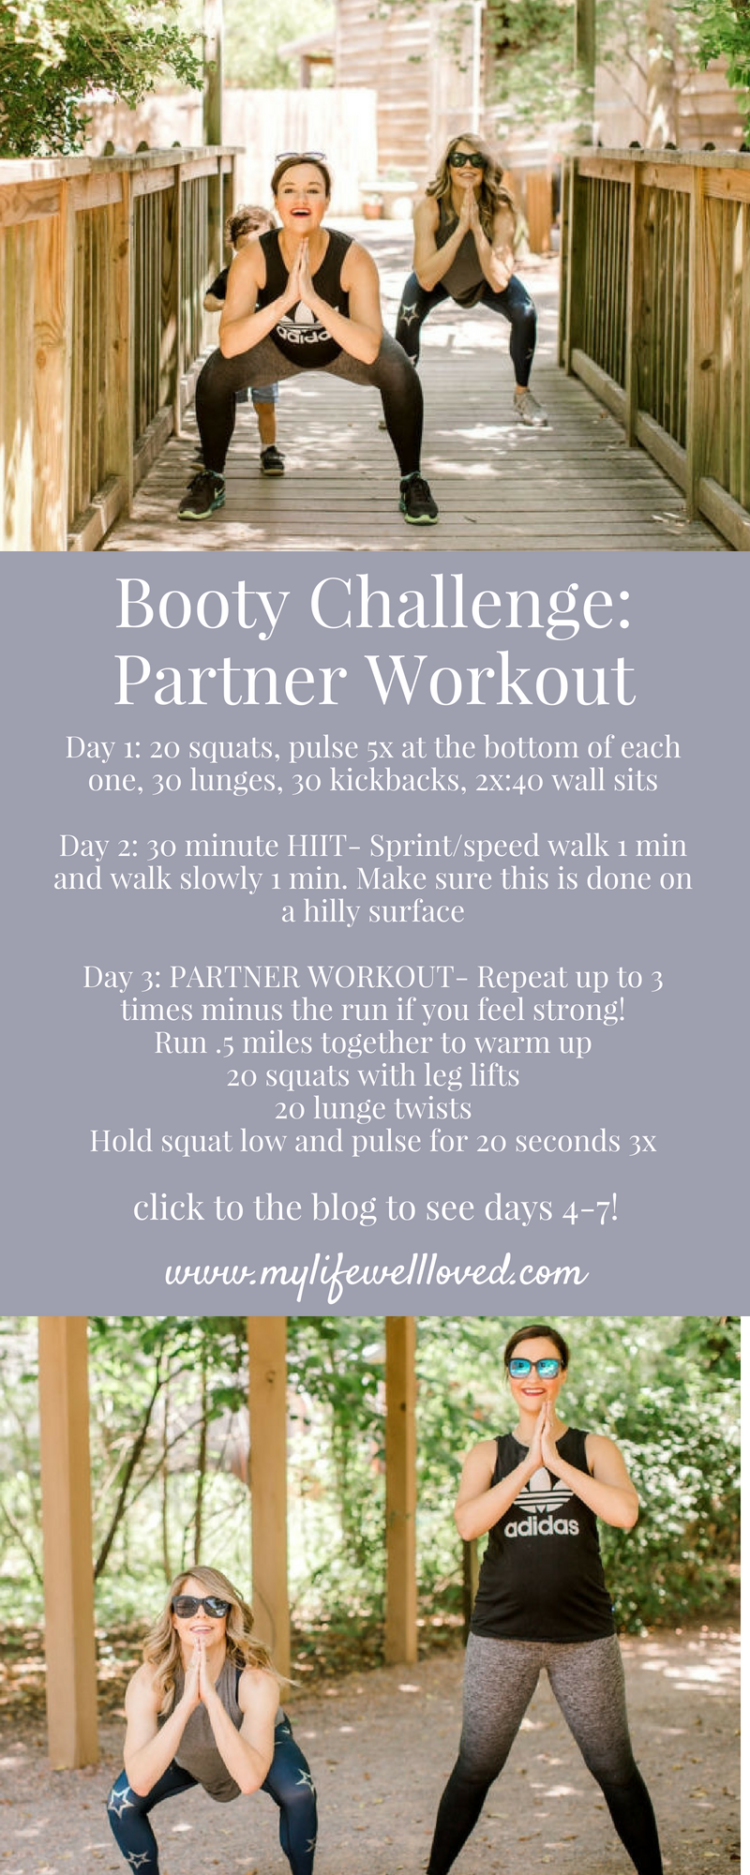 Booty Challenge: Partner Workout - Healthy By Heather Brown